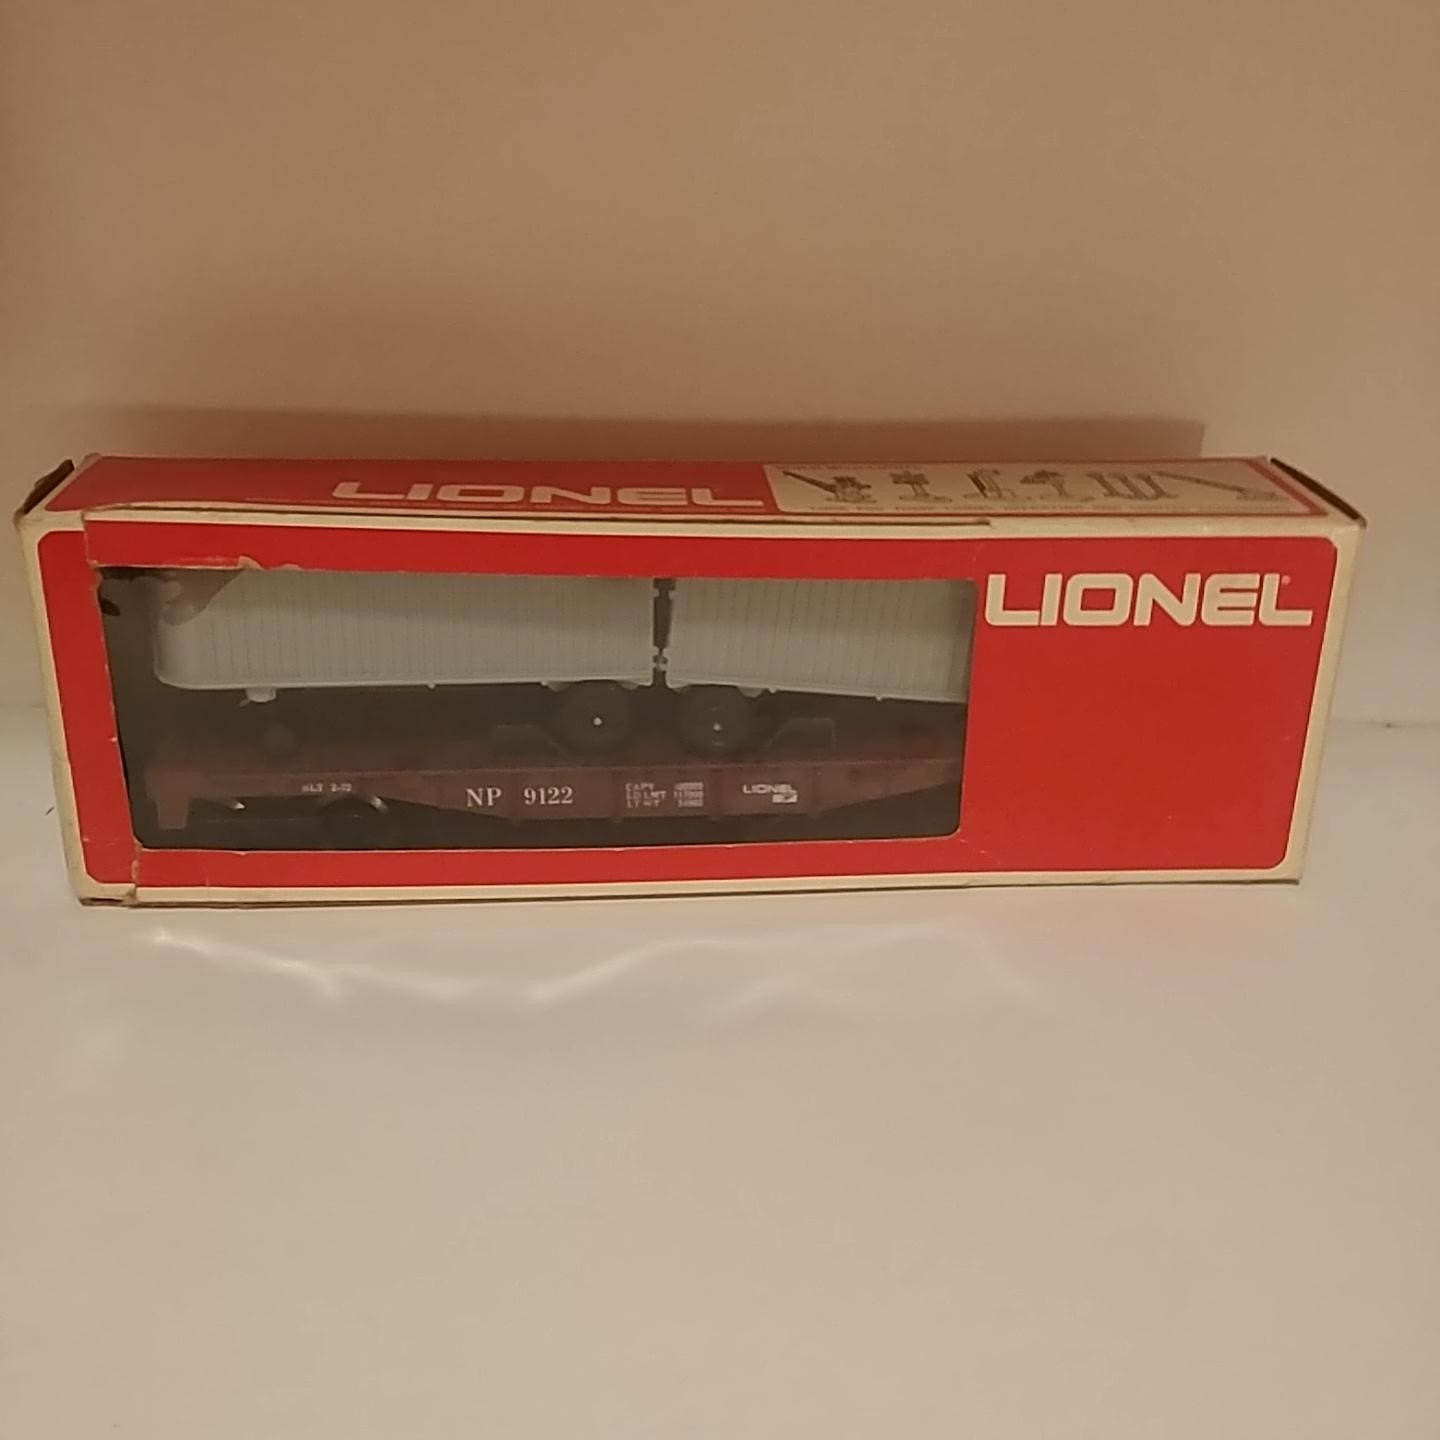 1974 Lionel 6-9122 "Northern Pacific" Flat with Vans